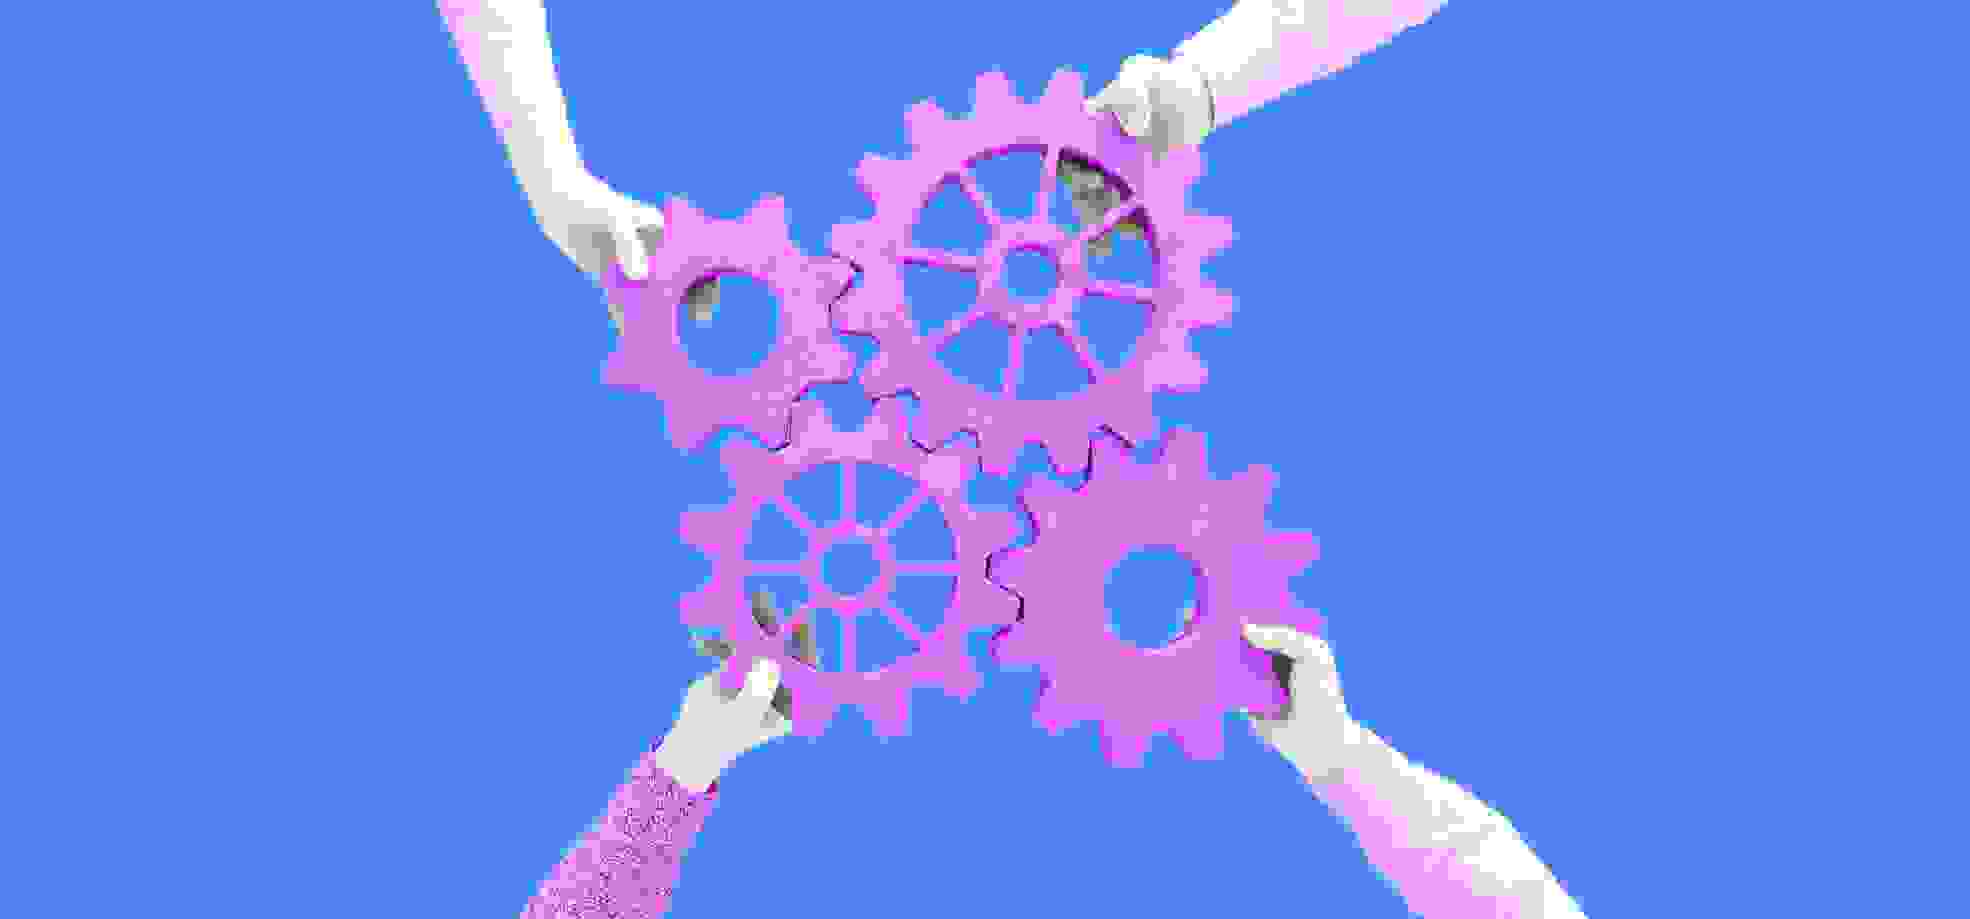 hands holding gears of different sizes